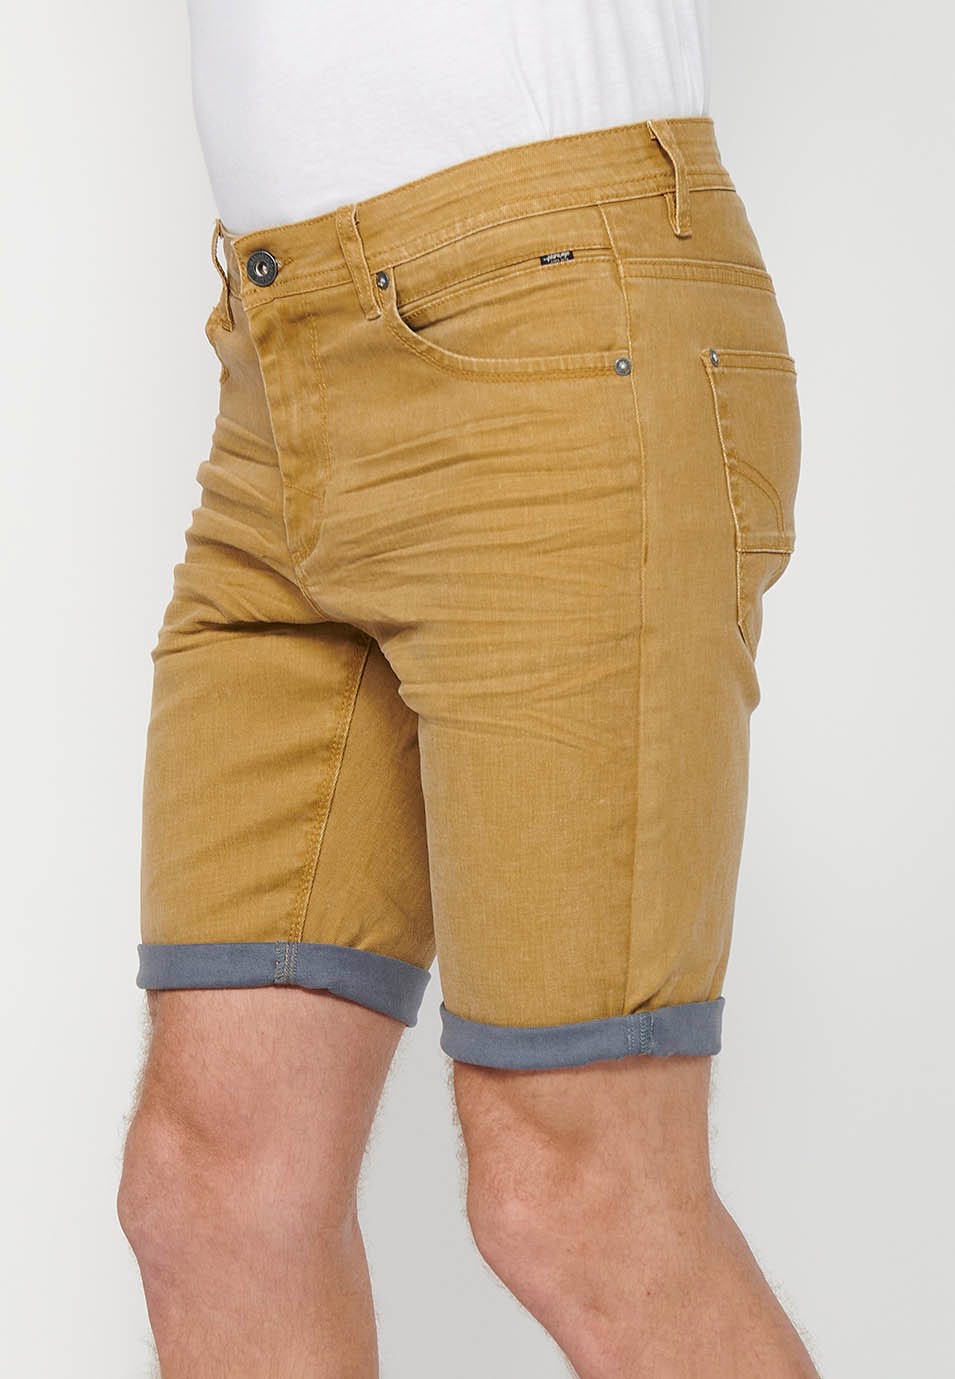 Denim Bermuda shorts with turn-up finish, front closure with zipper and button, with five pockets, one pocket pocket, Ocher Color for Men 2